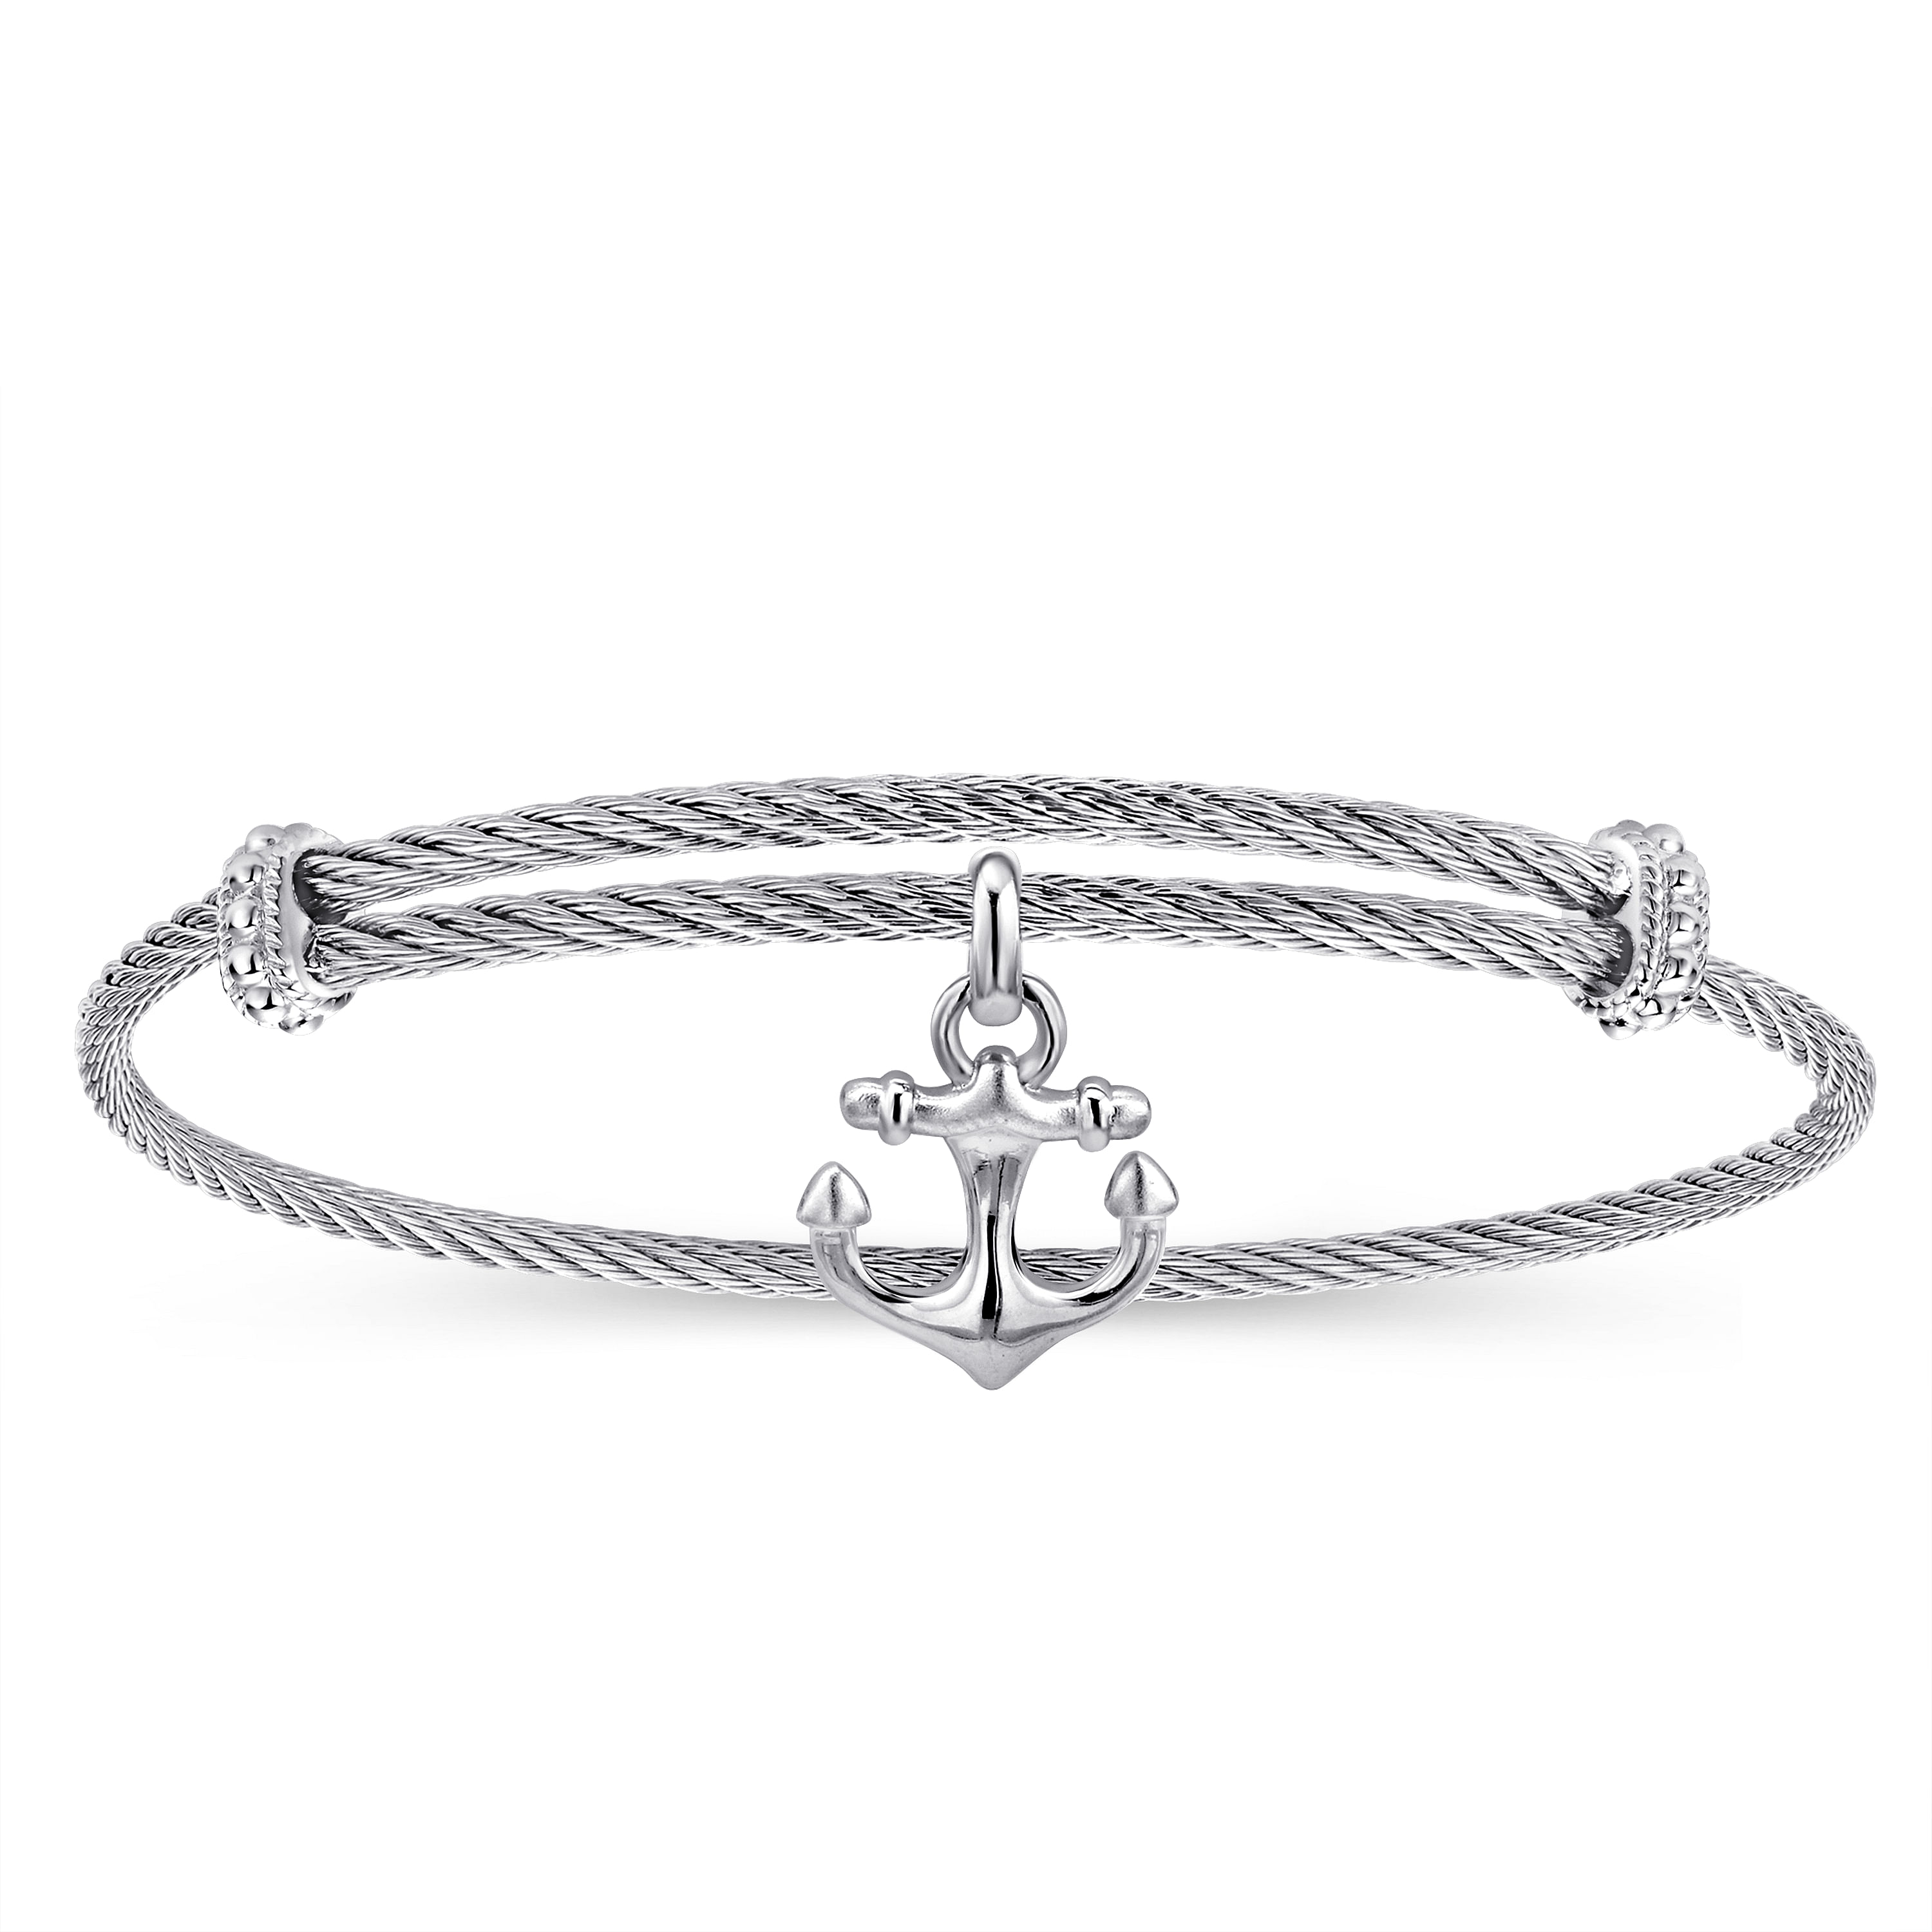 Adjustable Twisted Cable Stainless Steel Bangle with Sterling Silver Anchor Charm